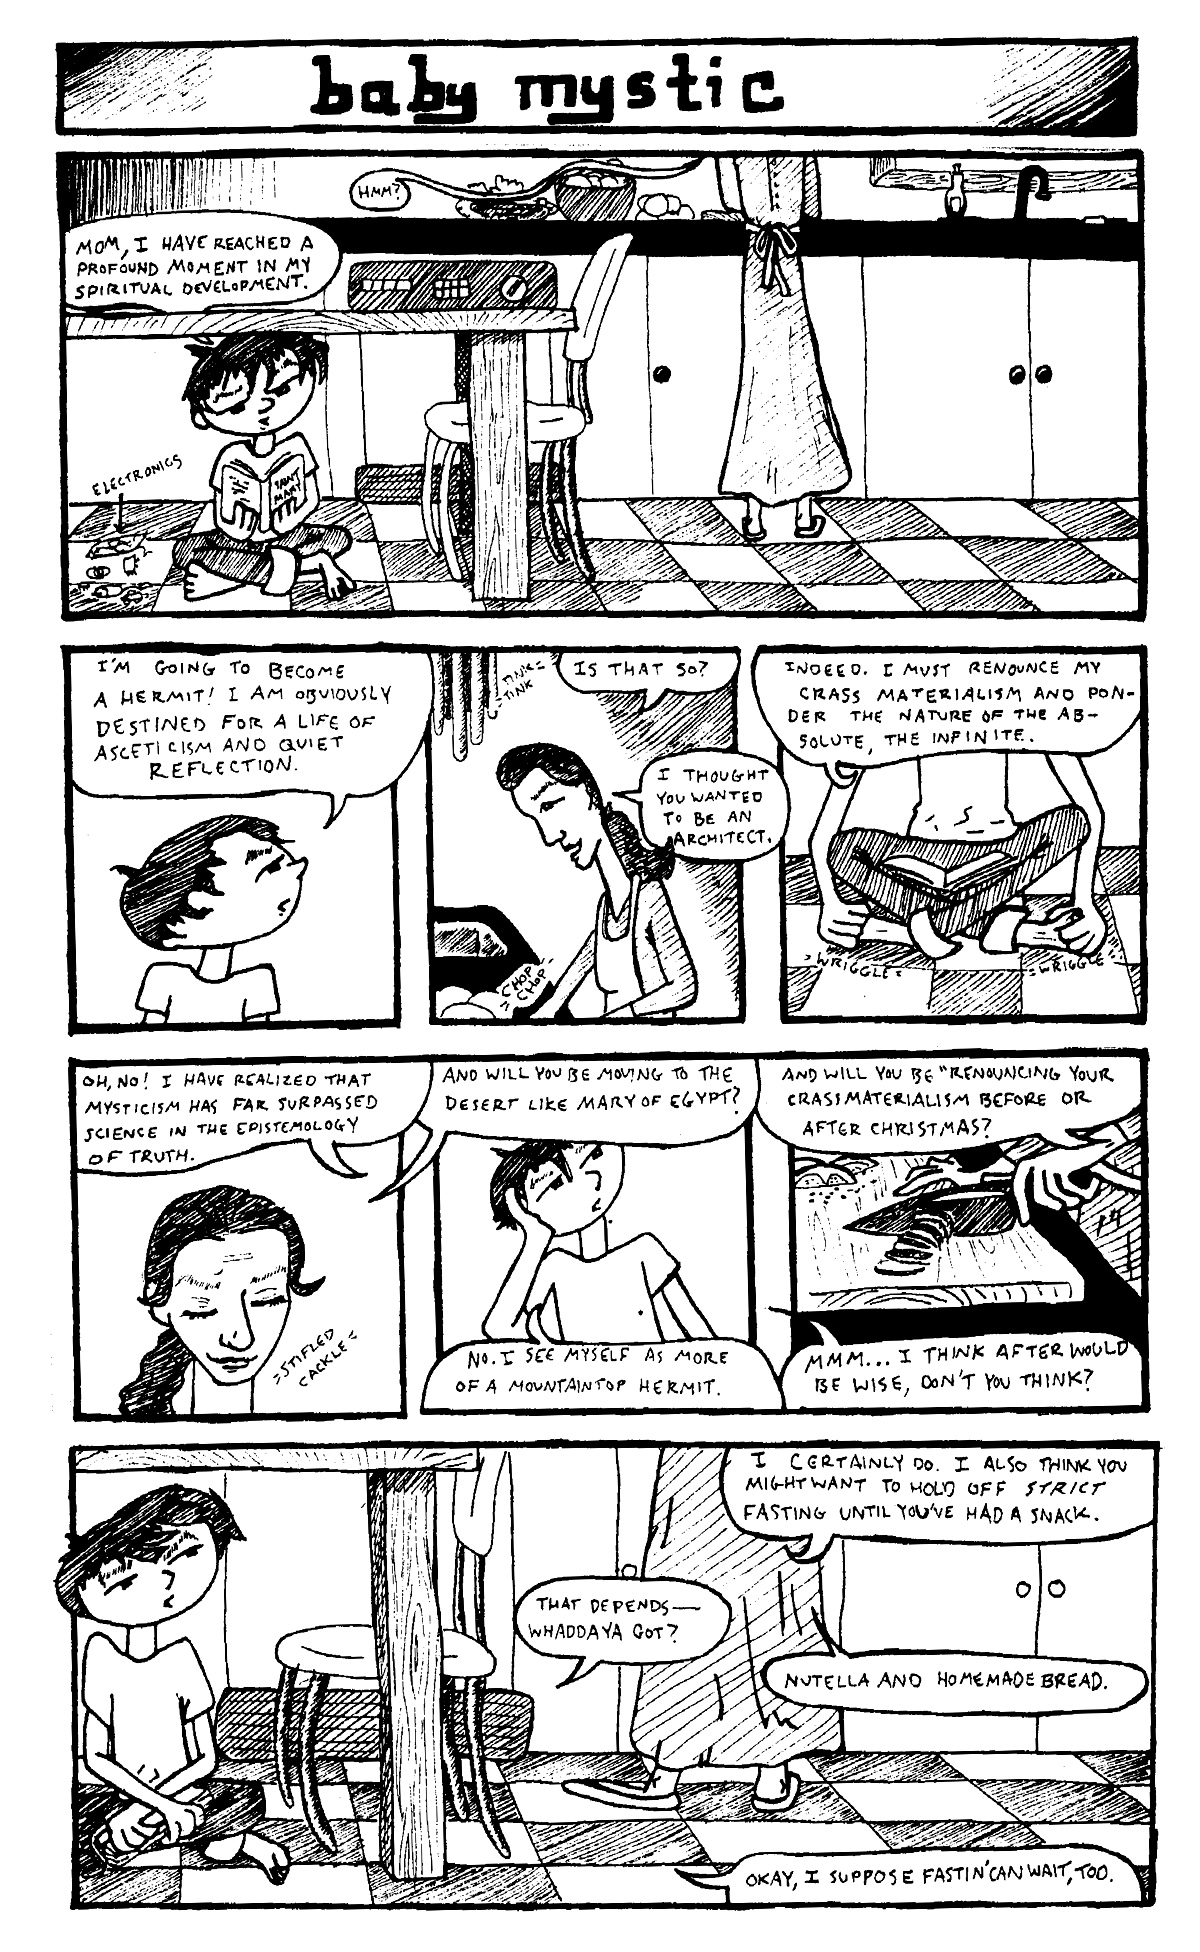 Full page autobiographical comic strip about a conversation Alex had with their mom about ritual fasting